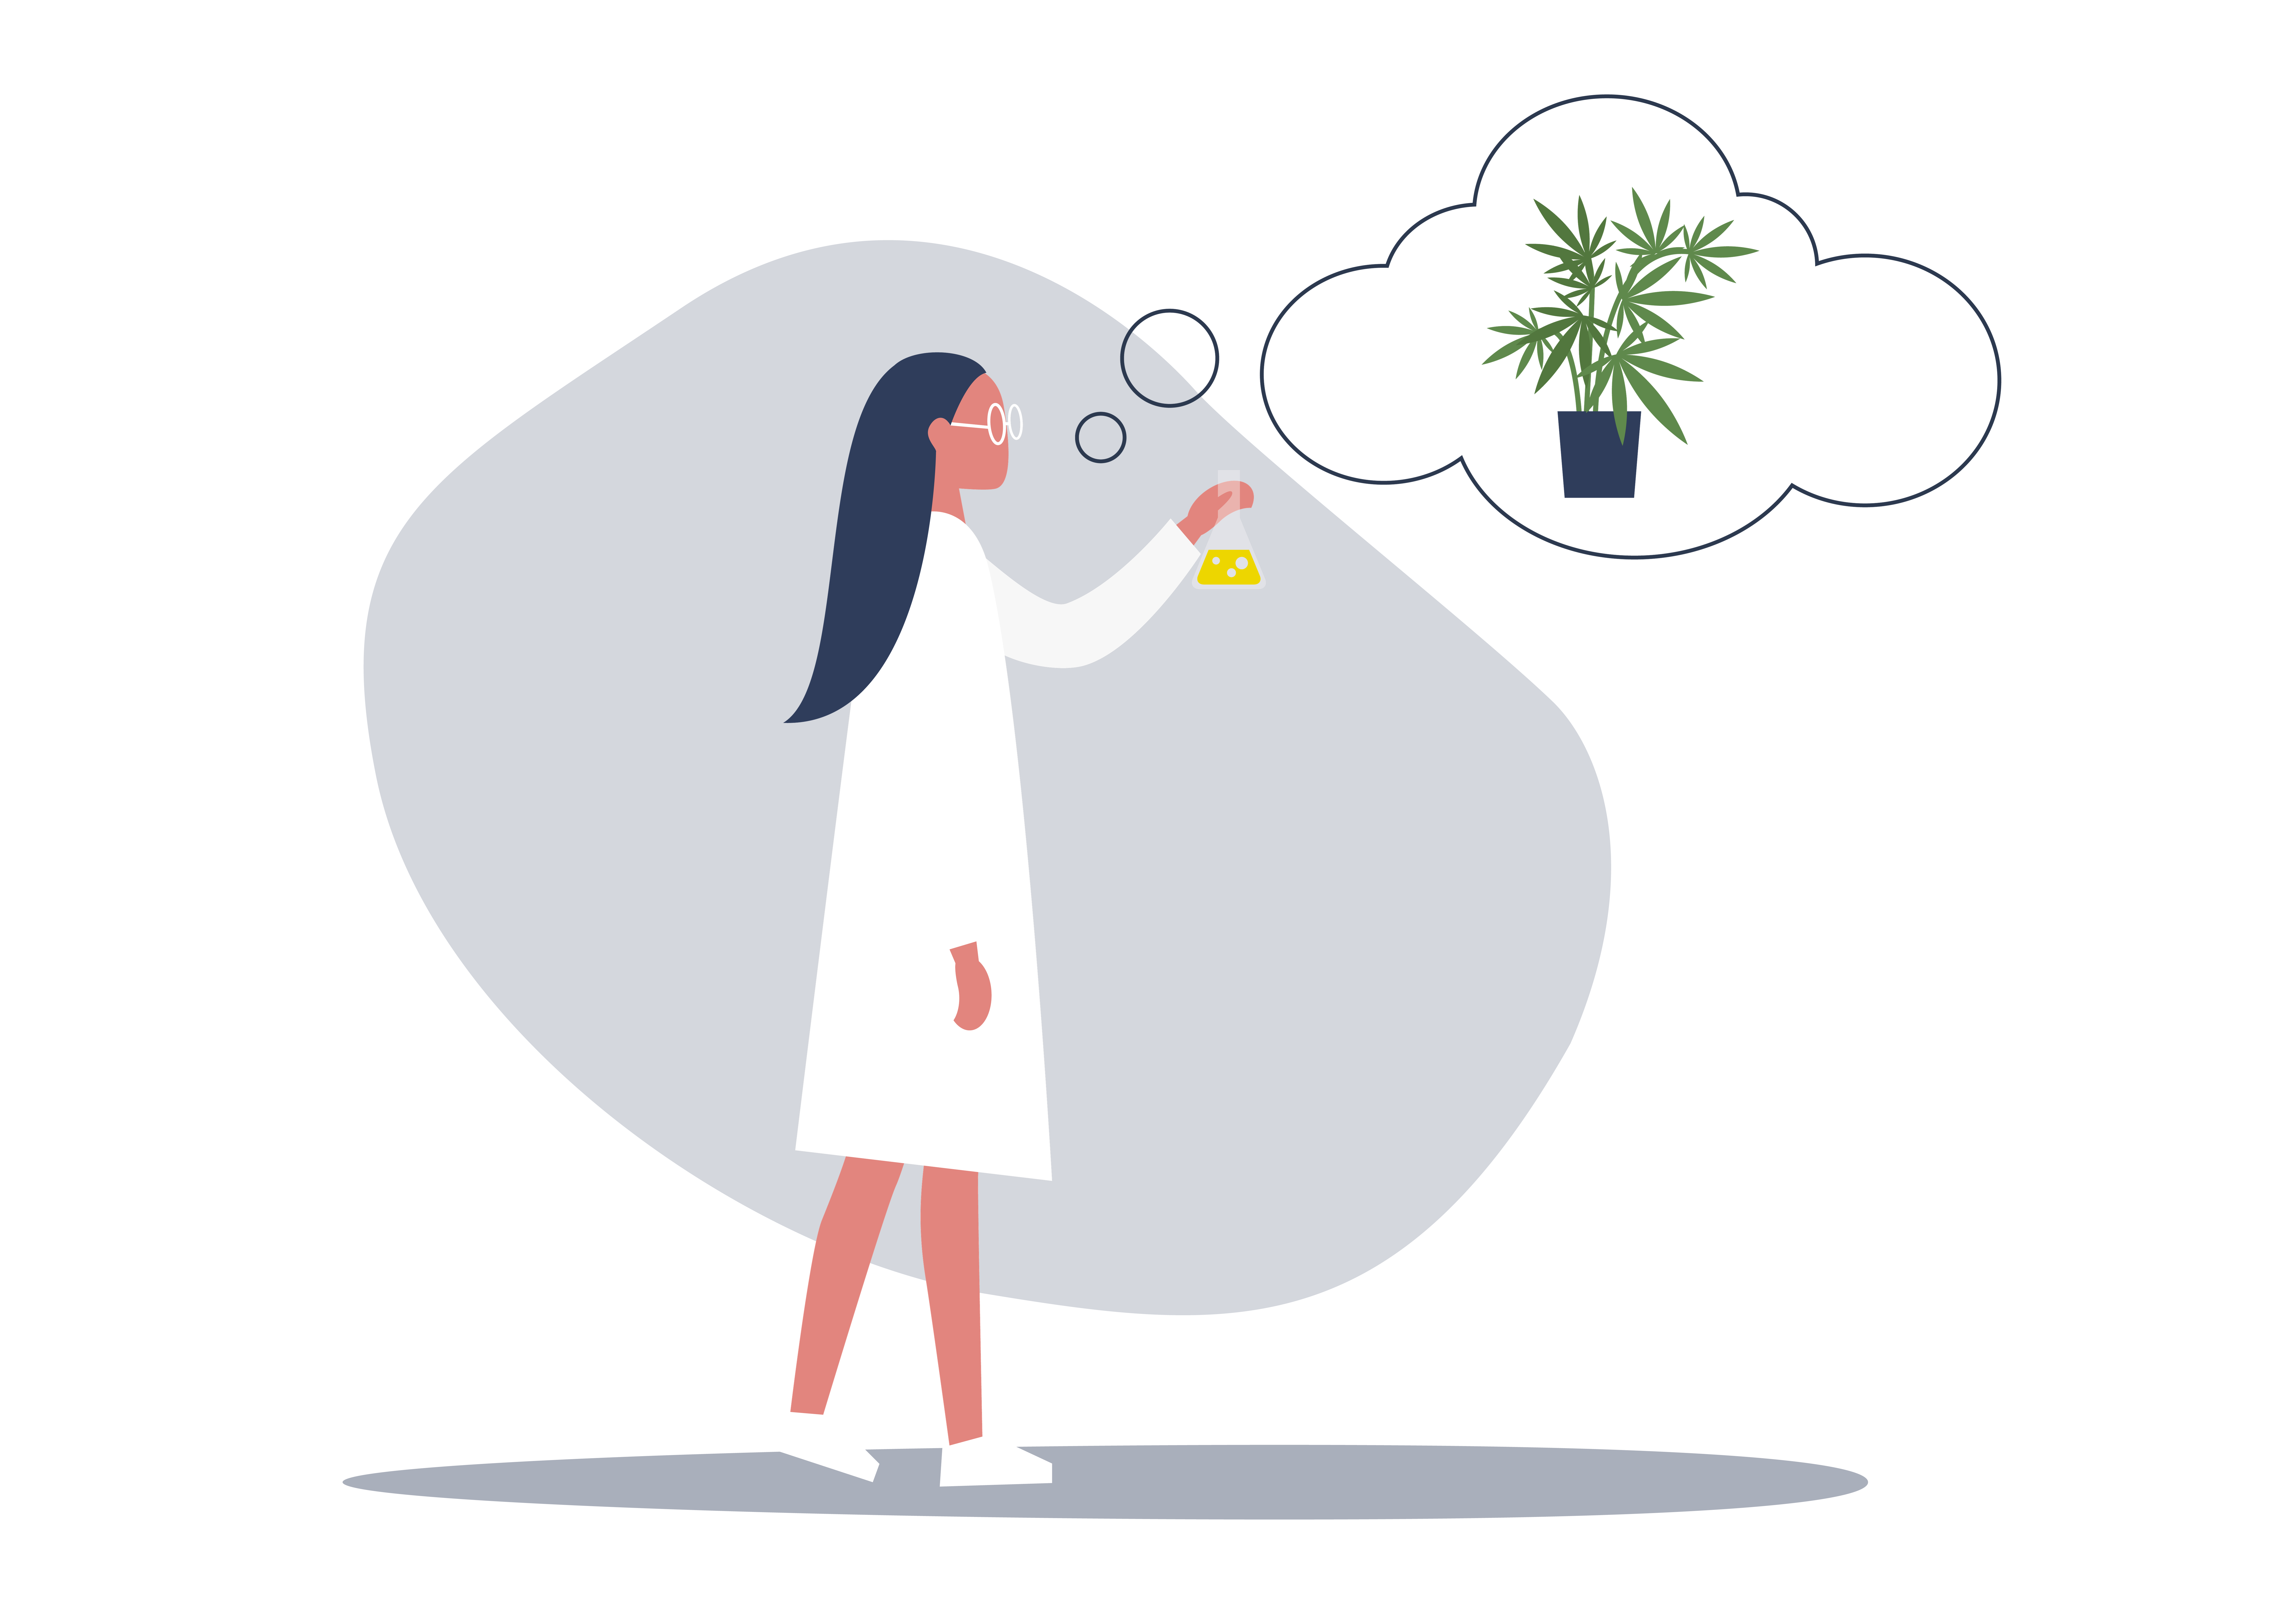 Cartoon Scientist with Hemp Plant thought bubble